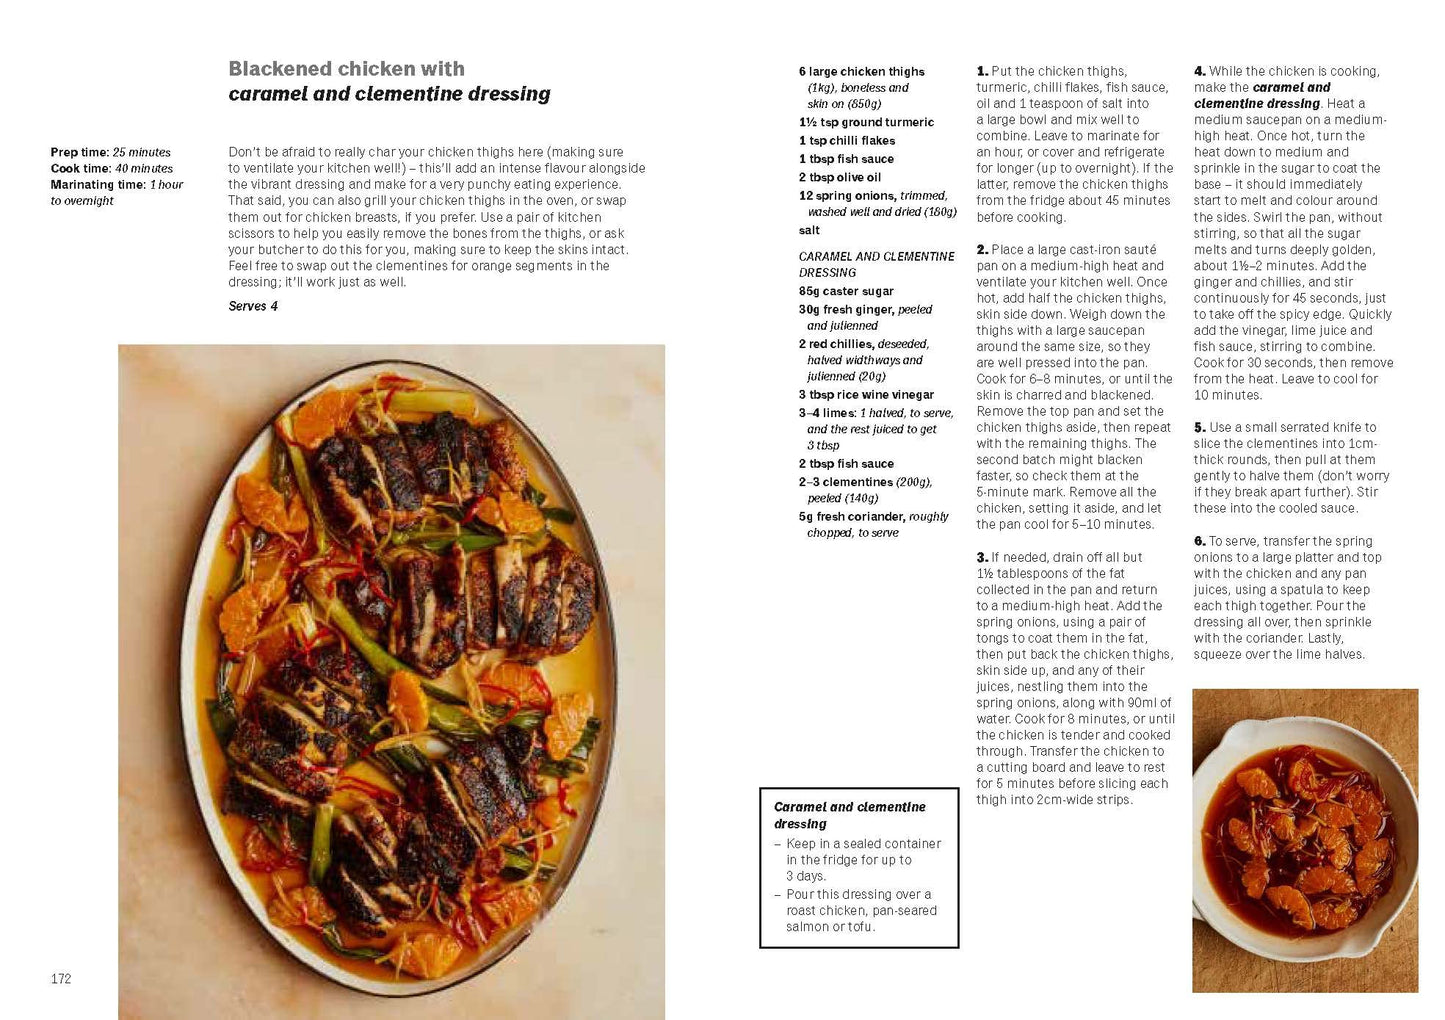 Ottolenghi Test Kitchen: Extra Good Things, Noor Murad, Yotam Ottolenghi